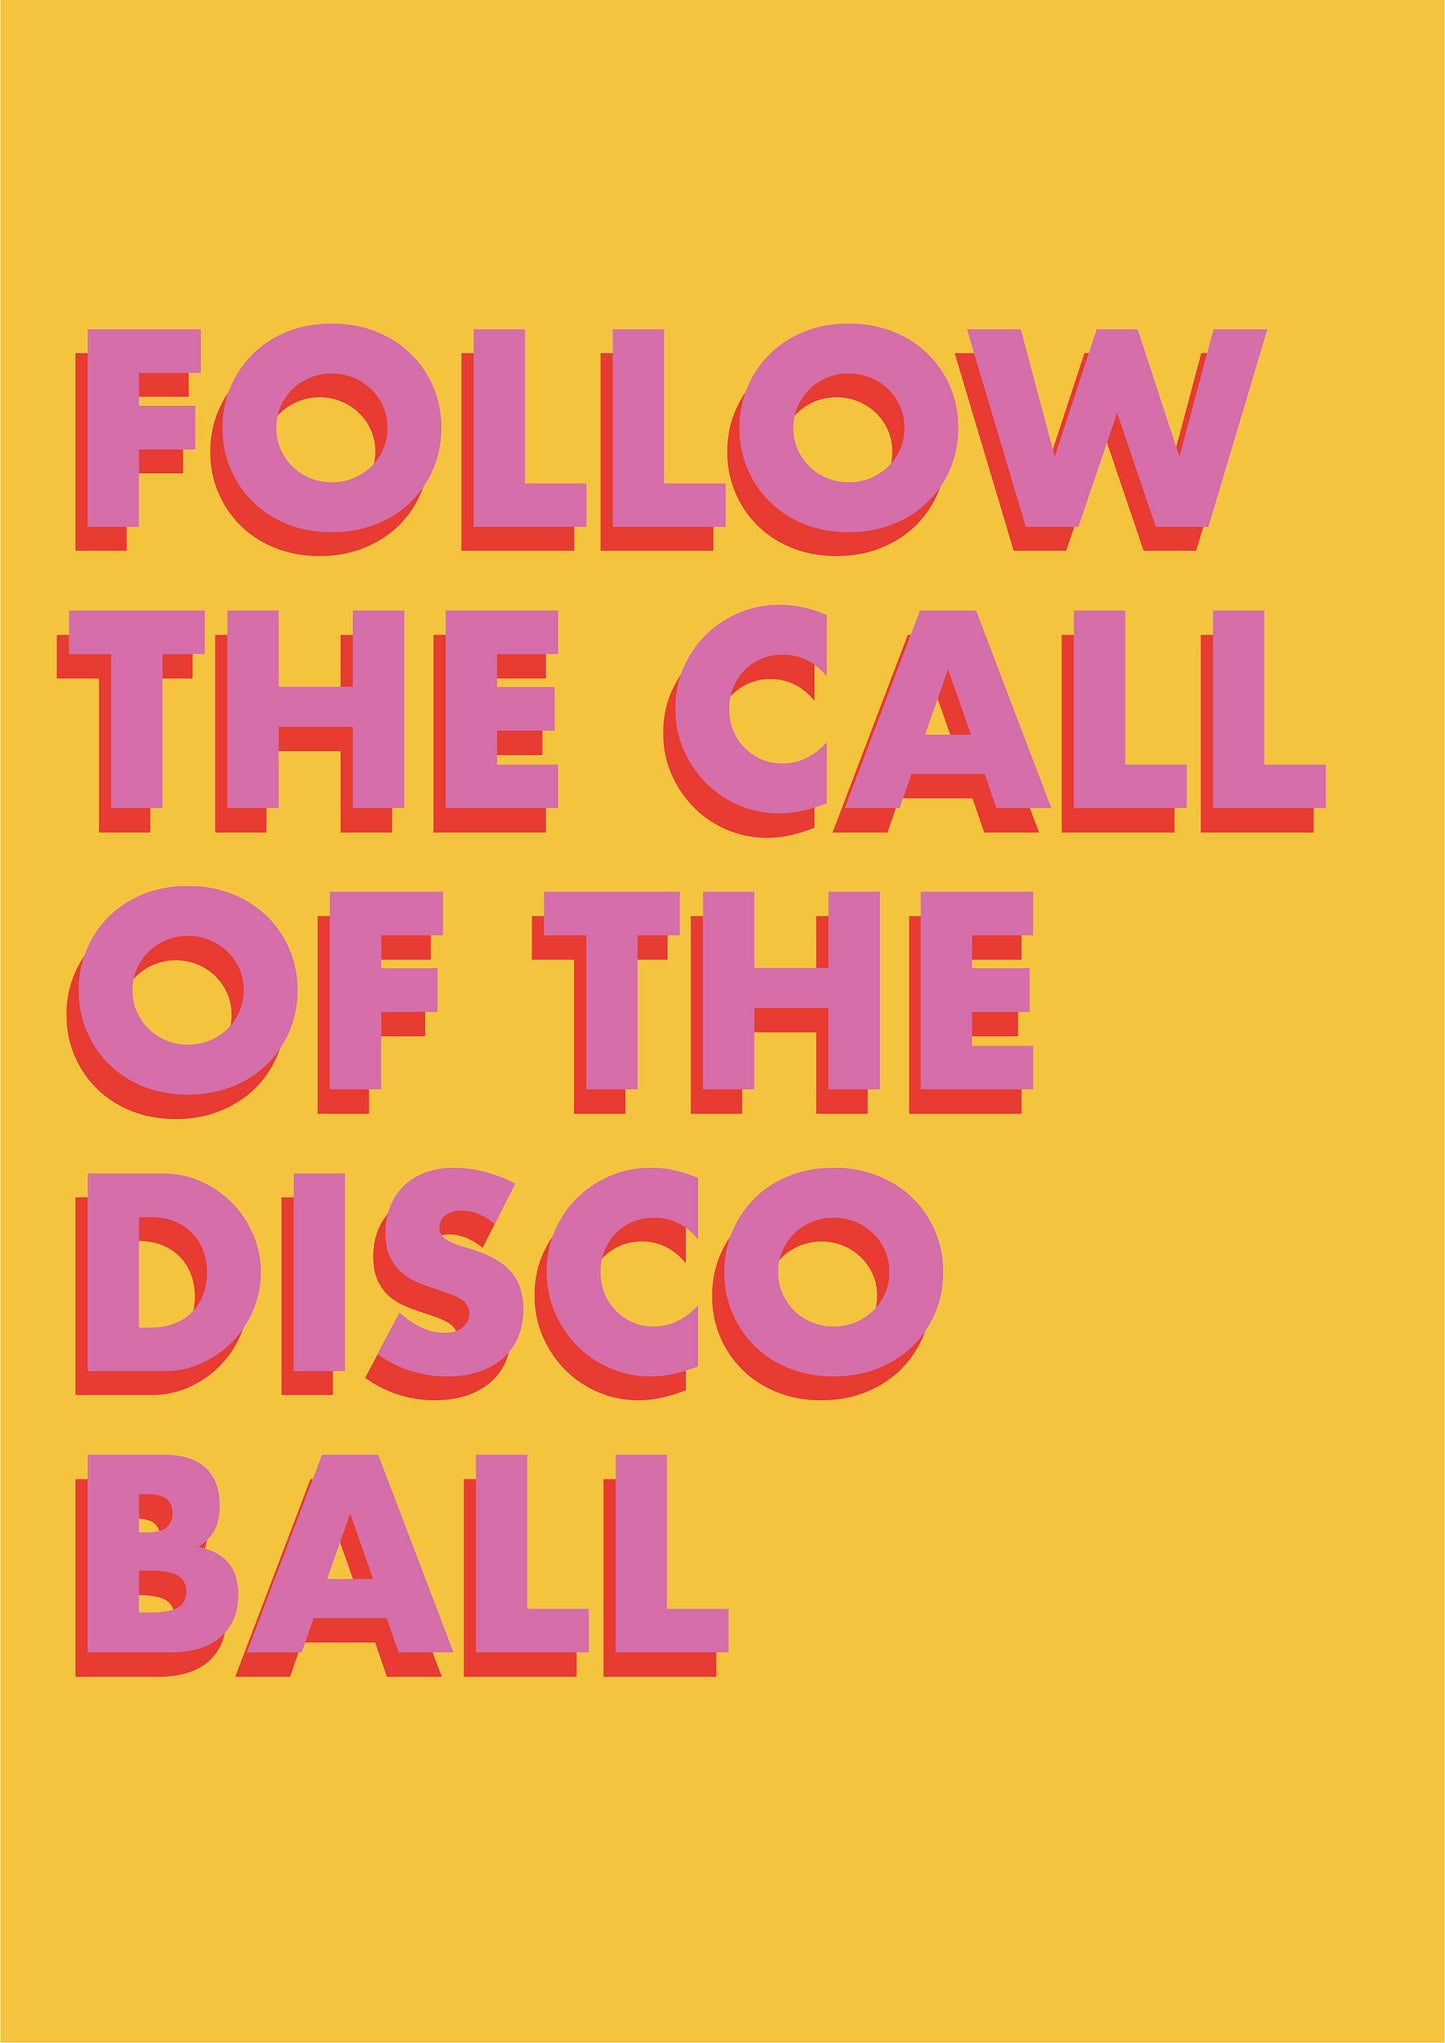 Follow The Call of The Disco Ball Typography Bar Yellow Print